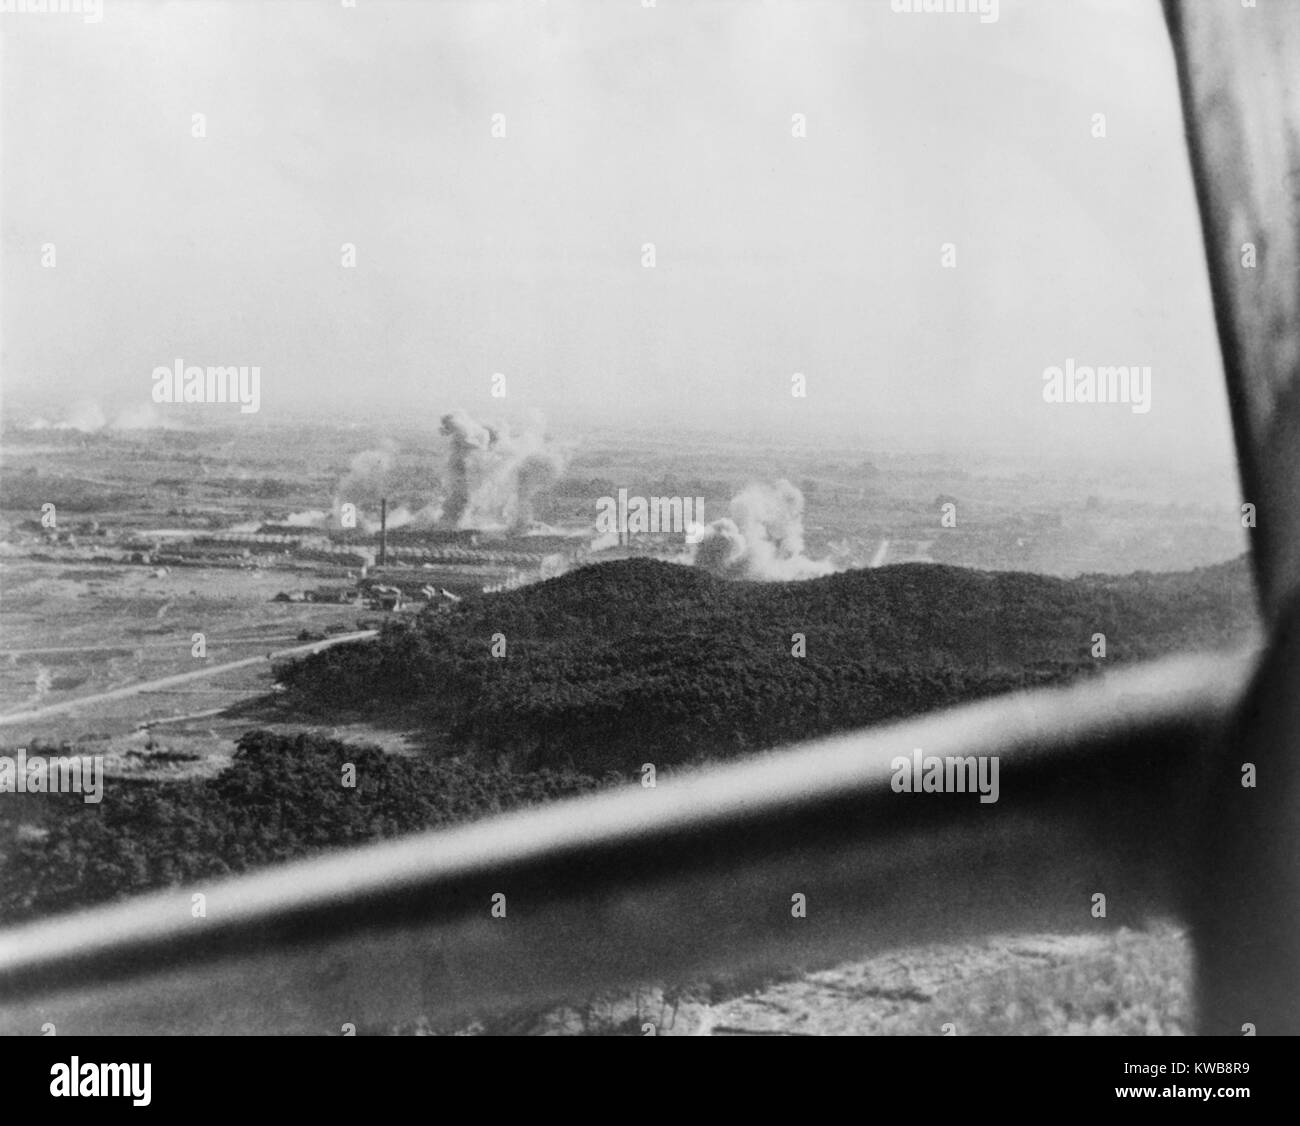 U.S. carrier-based planes bomb a factory plant near Tokyo in 1945. Framing the scene is the window of an American airplane. World War 2. (BSLOC 2014 10 118) Stock Photo